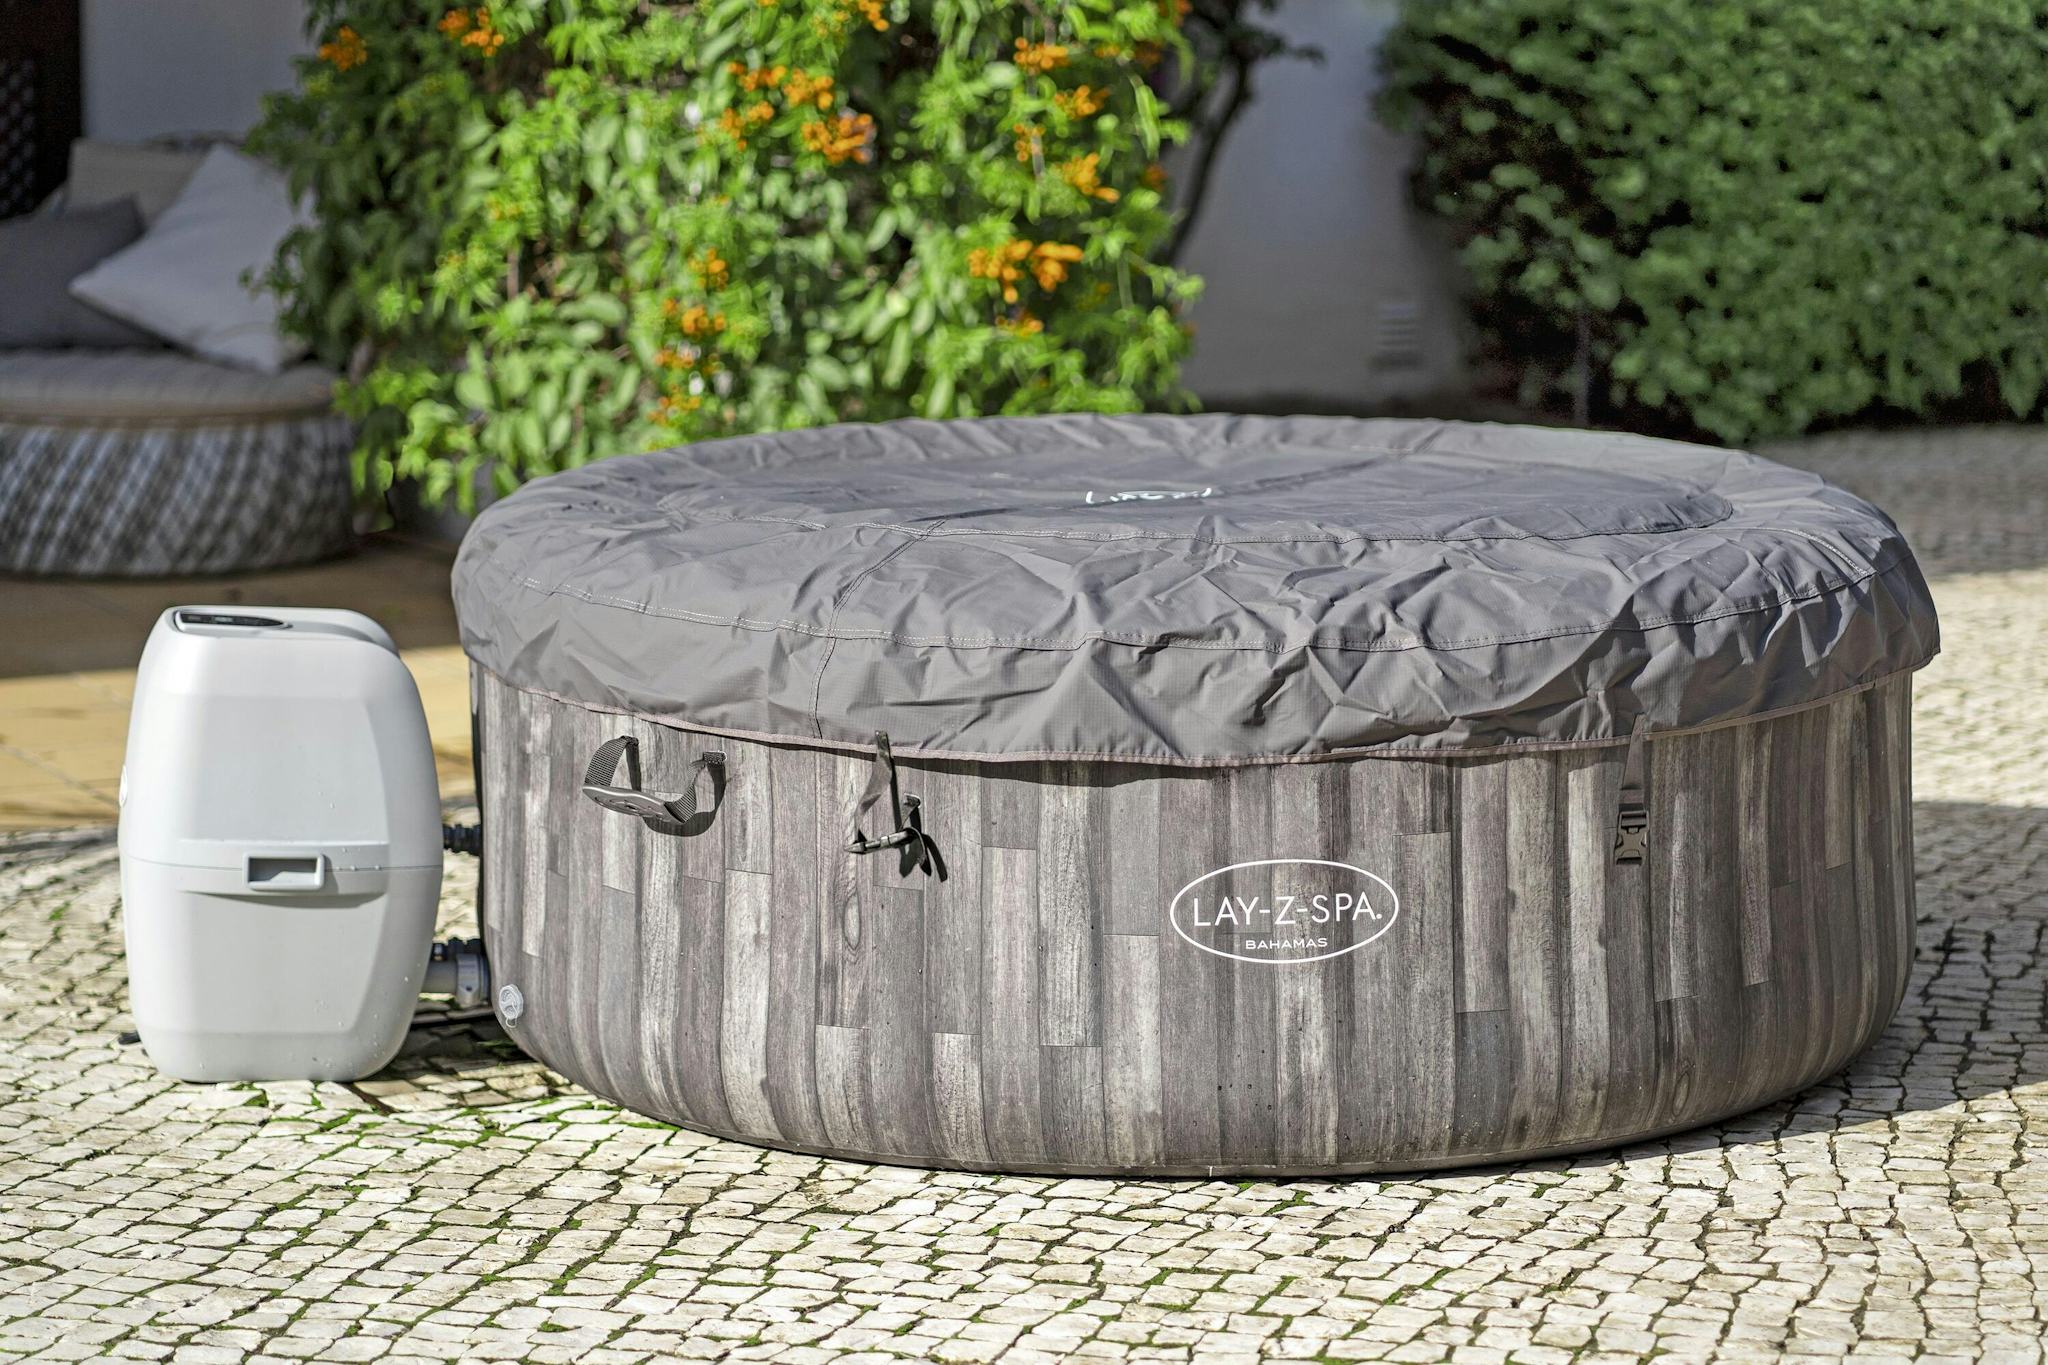 Spas Gonflables Spa gonflable rond Lay-Z-Spa Bahamas Airjet™ 2 - 4 personnes Bestway 9